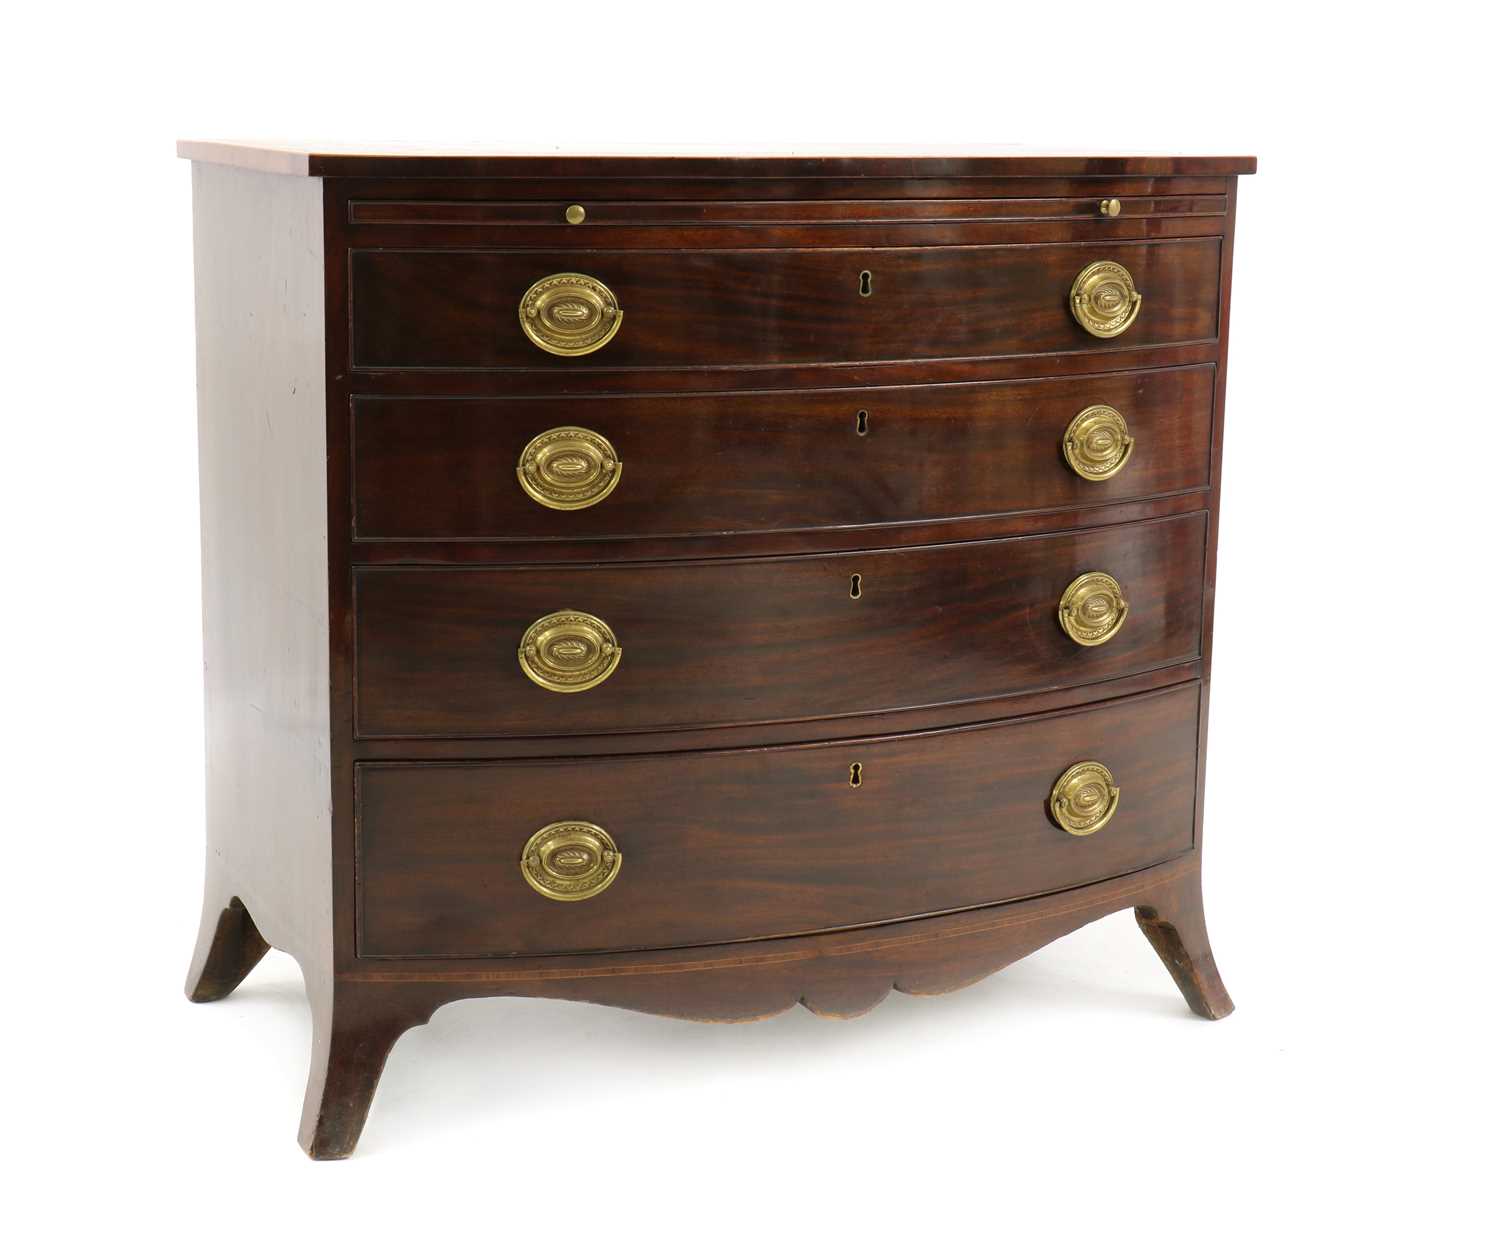 A Regency mahogany bachelor's bow front chest of drawers